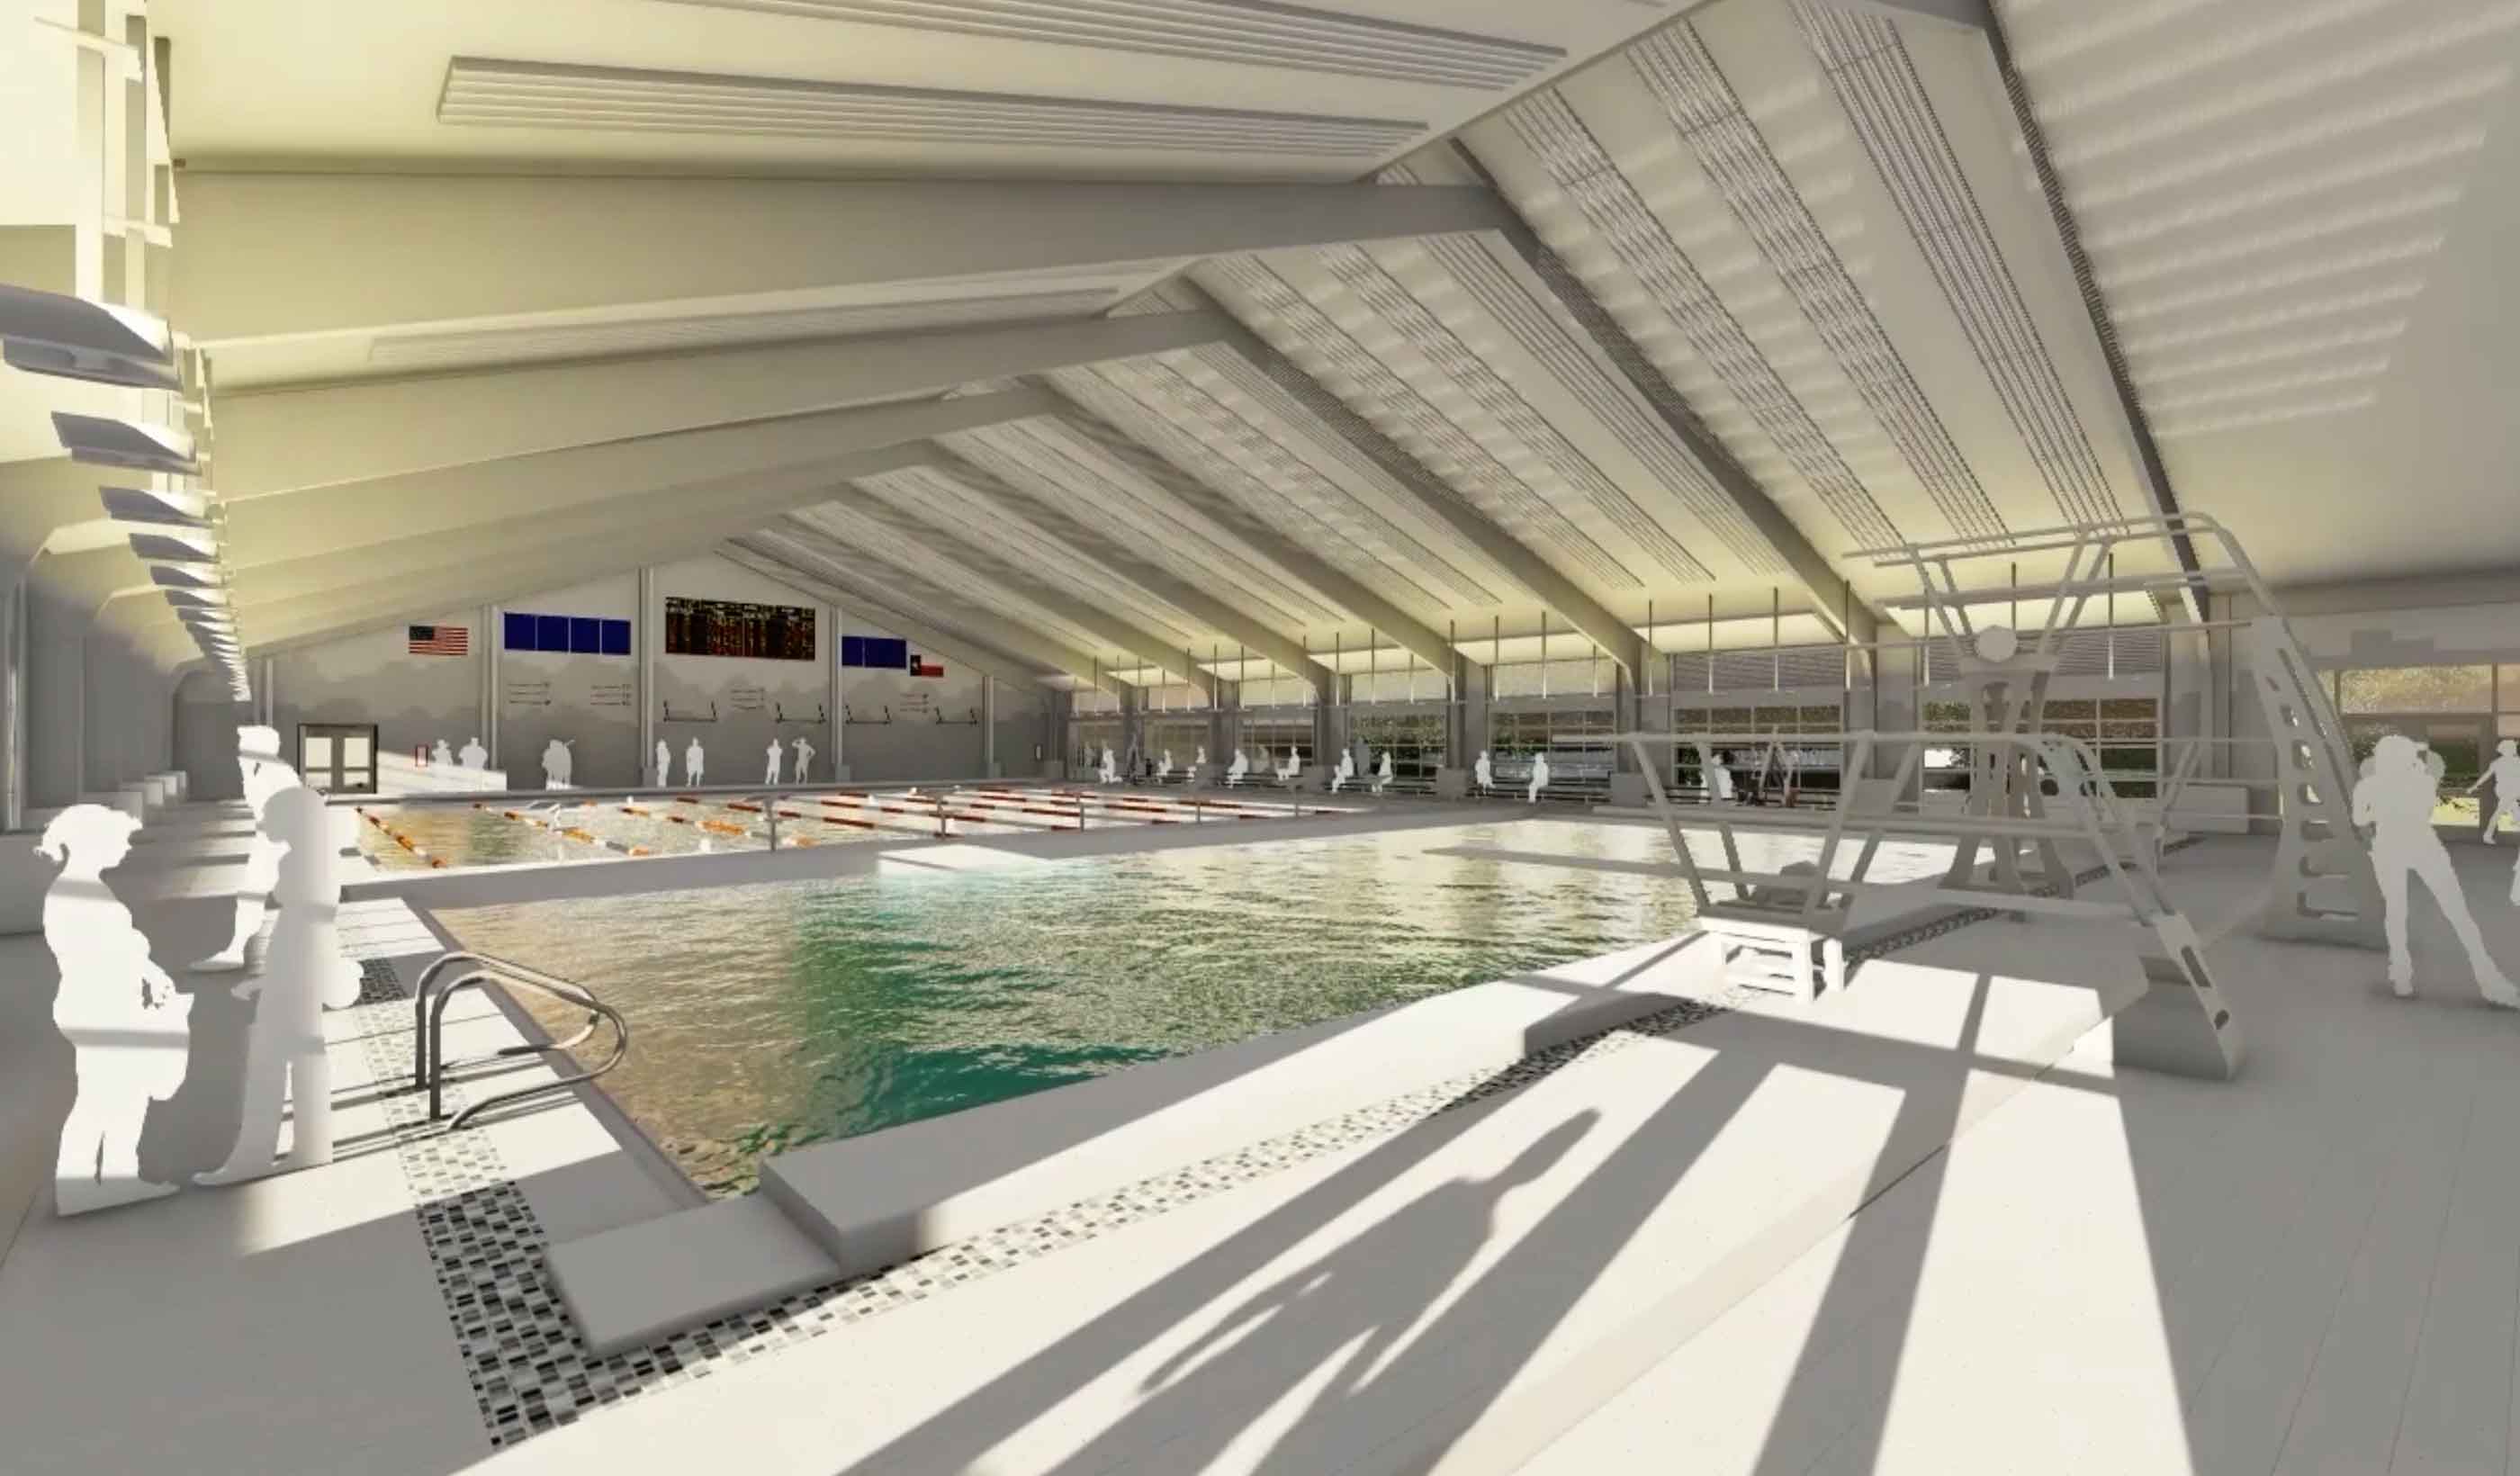 Eanes ISD: The upper echelon of sports, aquatics, and specialty facility design